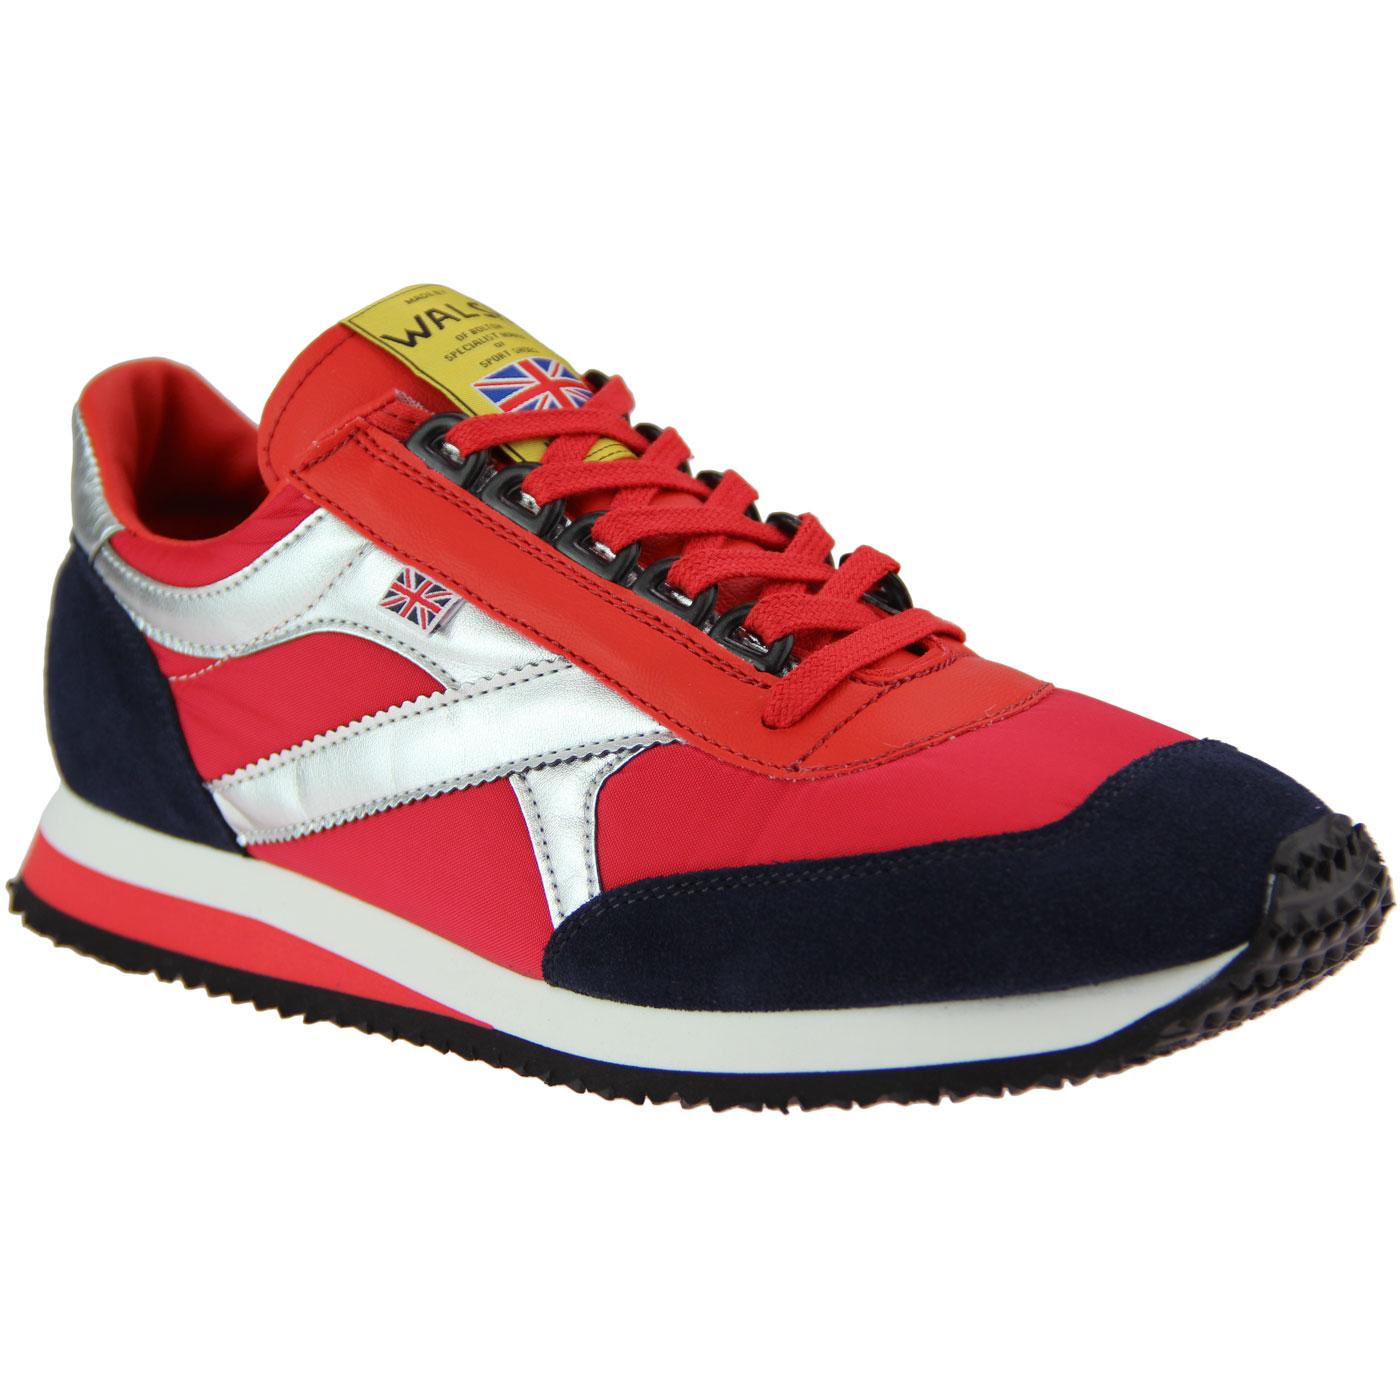 WALSH Voyager Made in England Retro Trainers in Red/Navy